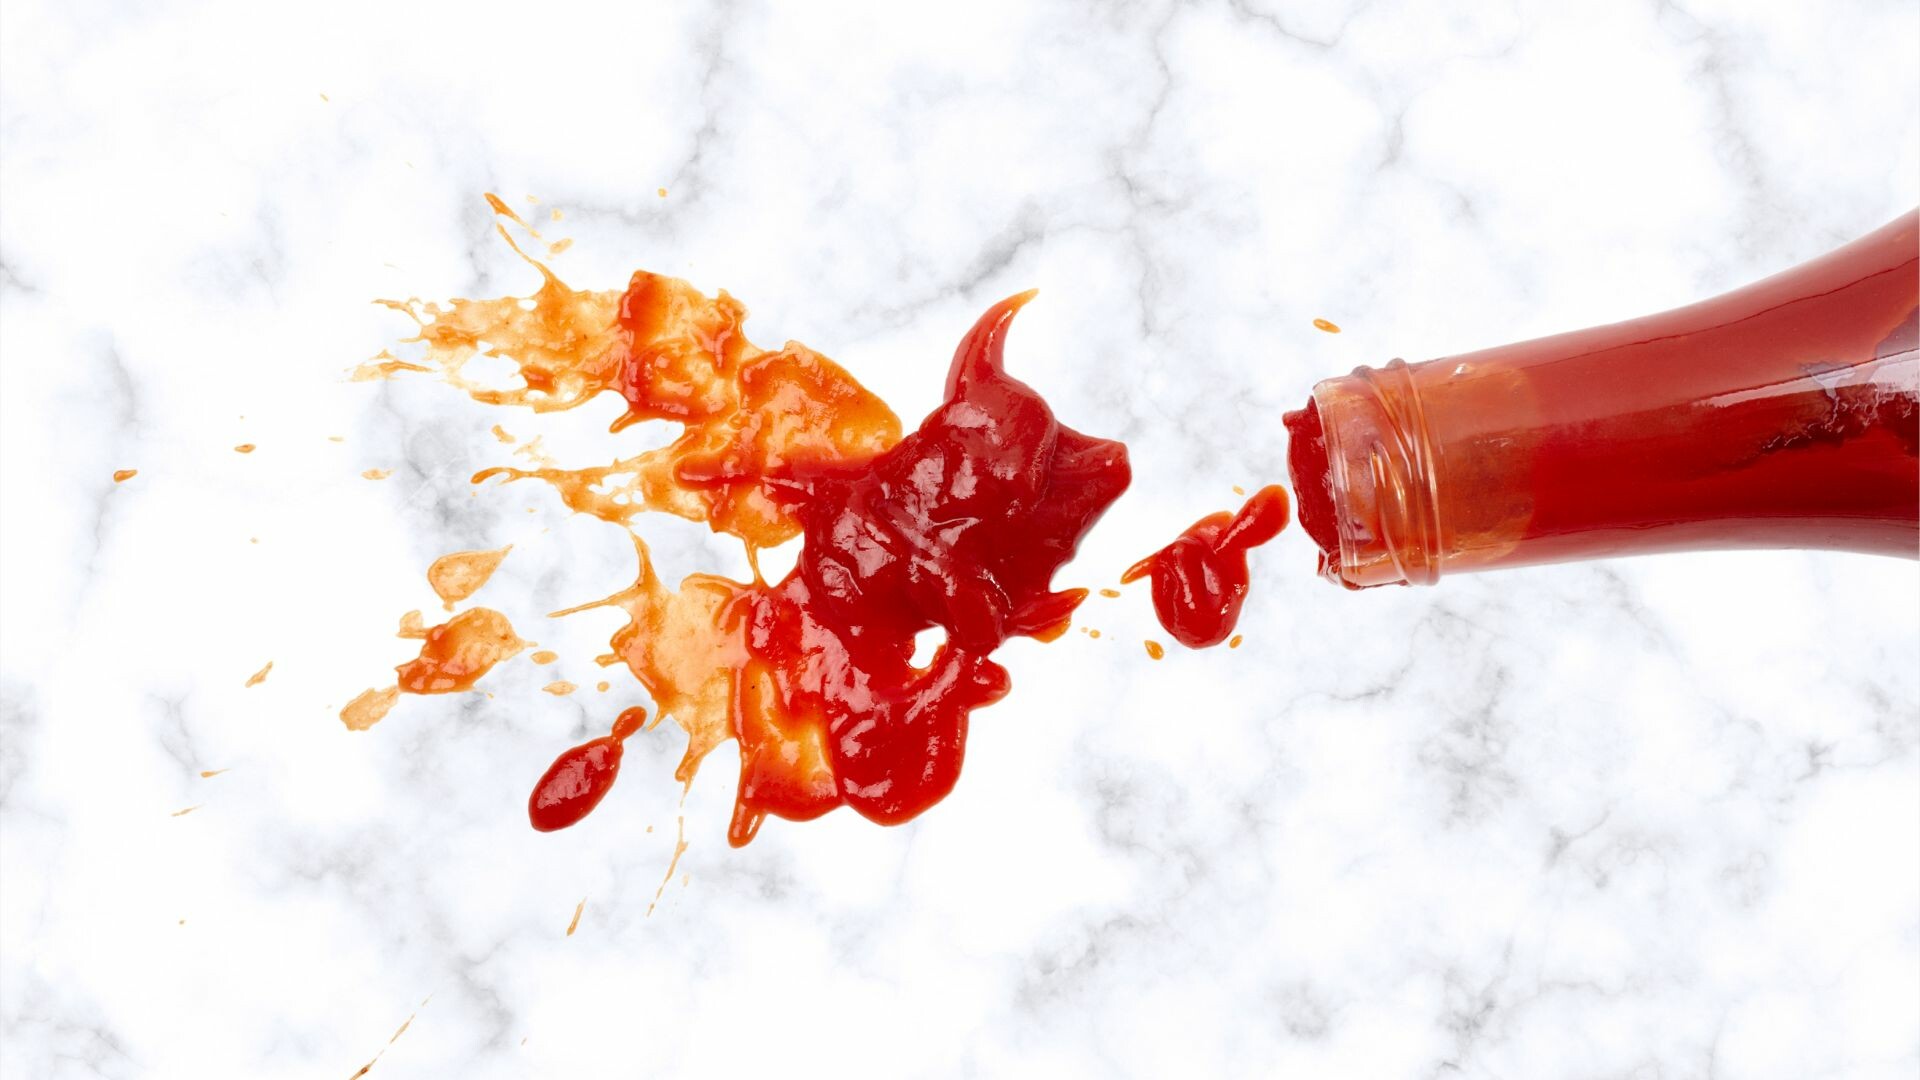 Glass bottle of ketchup that has spilled onto a surface.